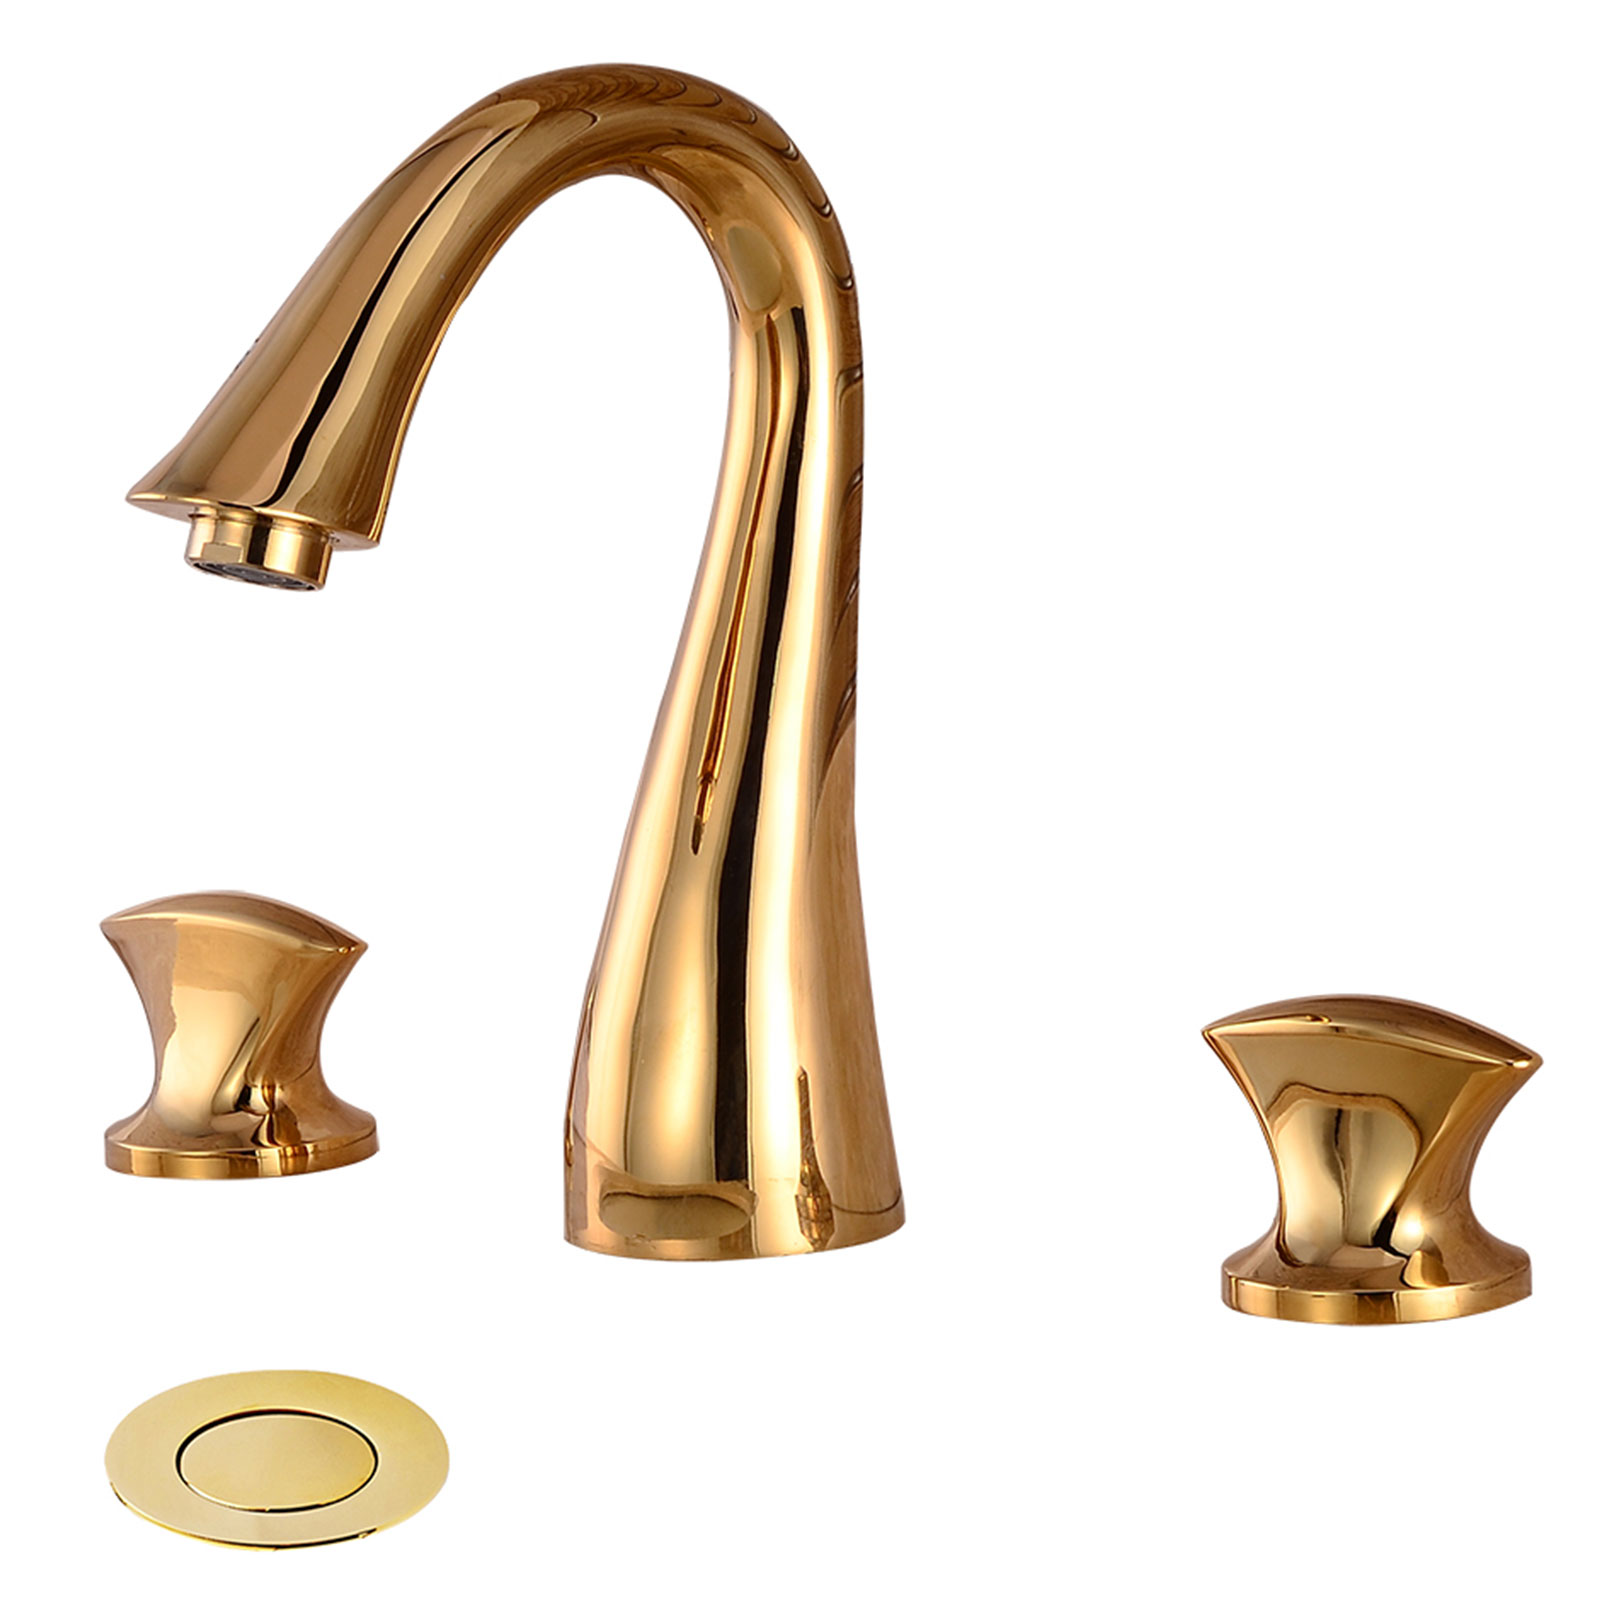 Wovier Widespread Faucet with Supply Hose,Three Handle Two Hole Bathroom Faucet W8422-1